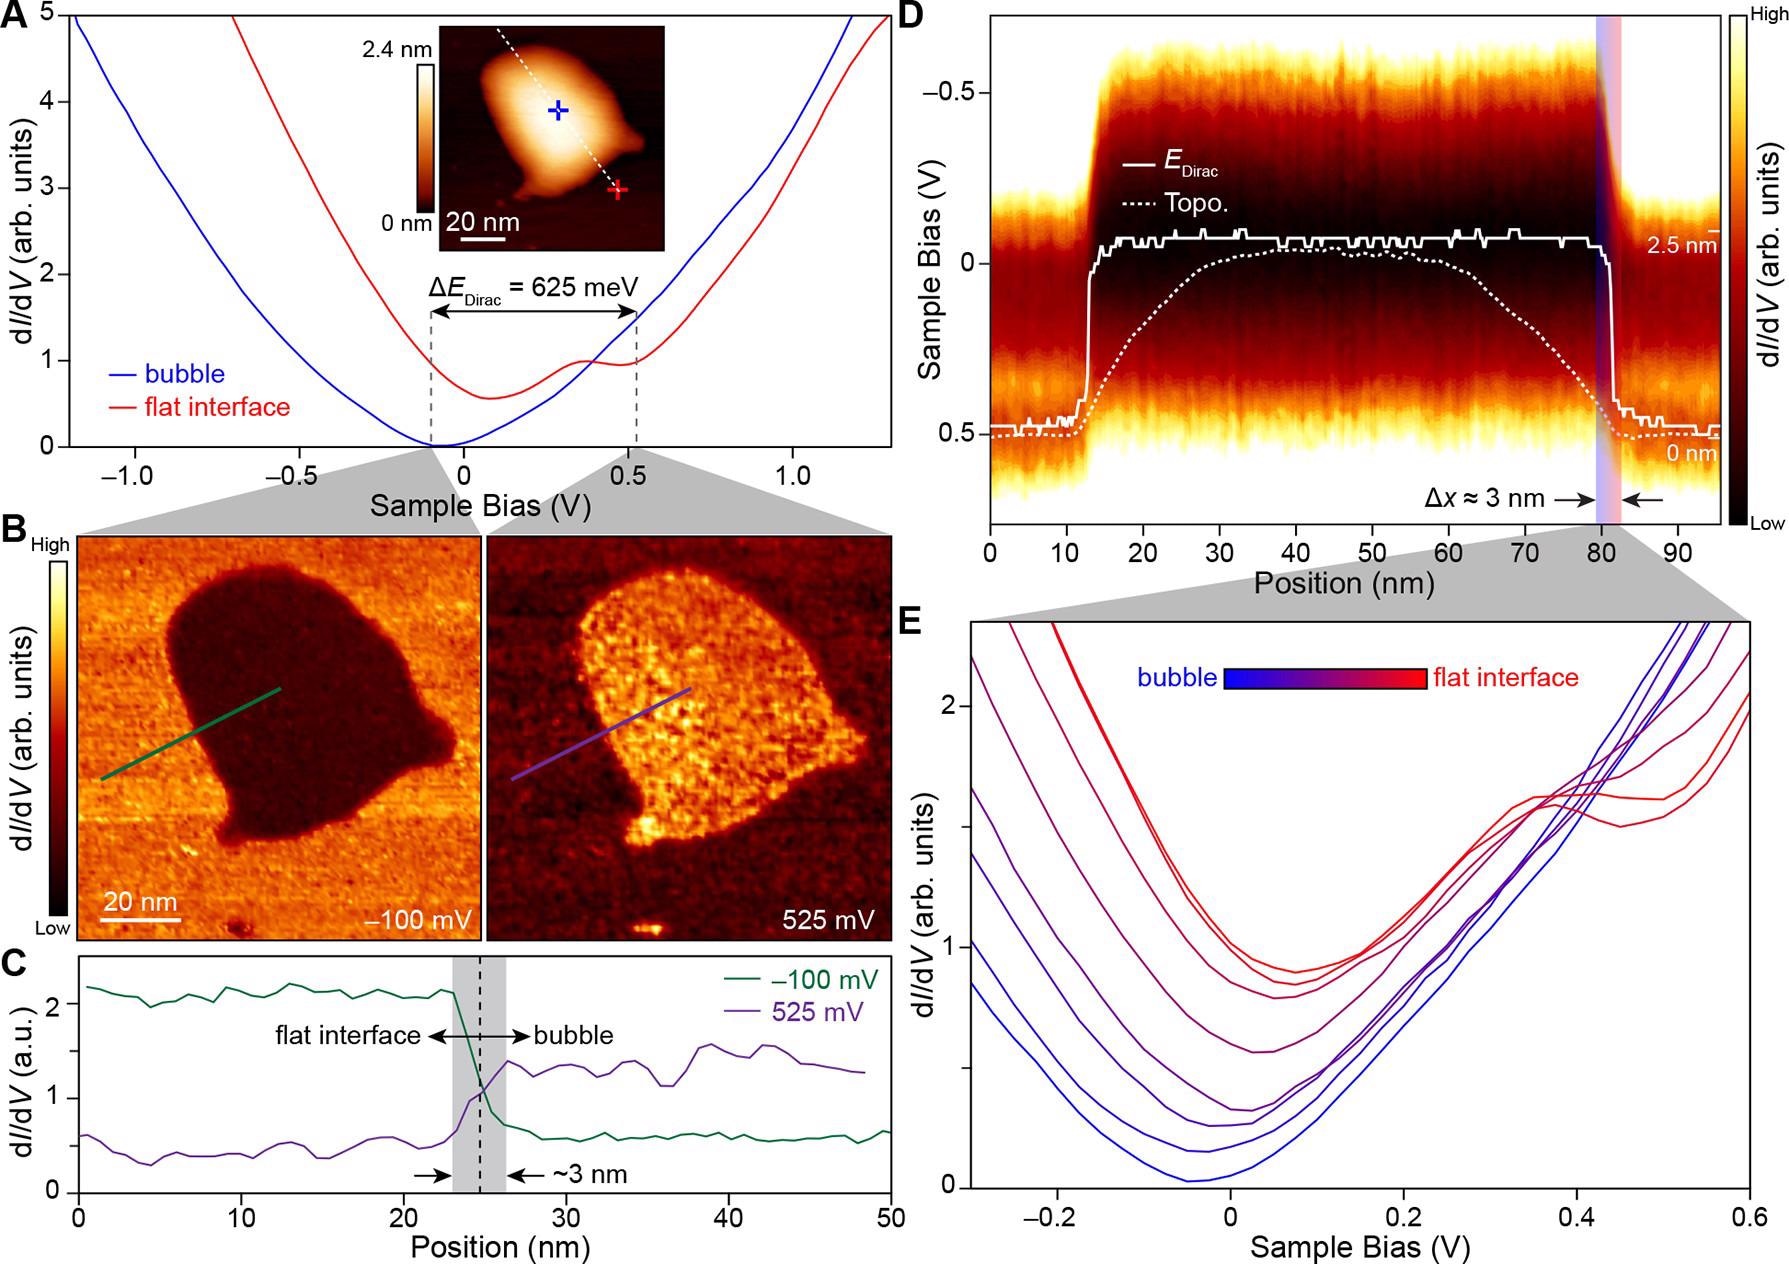 Electronic structure characterization of nanobubbles in graphene/a-RuCl3 using STM and STS. (A) Inset: STM topographic image of a graphene nanobubble (VS = 0.7 V, It = 50 pA). Representative dI/dV point spectroscopy collected over nanobubbles (blue curve) and flat graphene/a-RuCl3 interfaces (red curve) as indicated by the crosshairs in the inset. Between these two spectra, EDirac shifts by 625 meV. (B) dI/dV maps of a graphene nanobubble conducted at the indicated biases corresponding to the Dirac point energies on the nanobubble (left panel) and the flat interface (right panel) (VAC = 25 mV, It = 50 pA). A suppressed LDOS is observed at those biases associated with the local Dirac point energy. (C) Linecuts of the dI/dV maps shown in (B) following the green and purple lines indicated on the -100 and 525 mV maps, respectively. In both instances, the change in the LDOS at the bubble boundary (indicated by the black dashed line) takes place over a lateral length of approximately 3 nm. (D) Position-dependent dI/dV point spectroscopy collected along the dotted white trajectory shown in the inset in (A). The shift in the Dirac point energy occurs over a lateral length scale of ~3 nm as indicated by the region highlighted in partially transparent red and blue. The position-dependence of the Dirac point energy (solid white line) is superimposed on the topographic line cut (dotted white line) showing that the prior has a much more abrupt spatial dependence than the latter. (E) Sample dI/dV point spectra collected at the threshold of a graphene nanobubble corresponding to the red and blue highlighted region in (D).